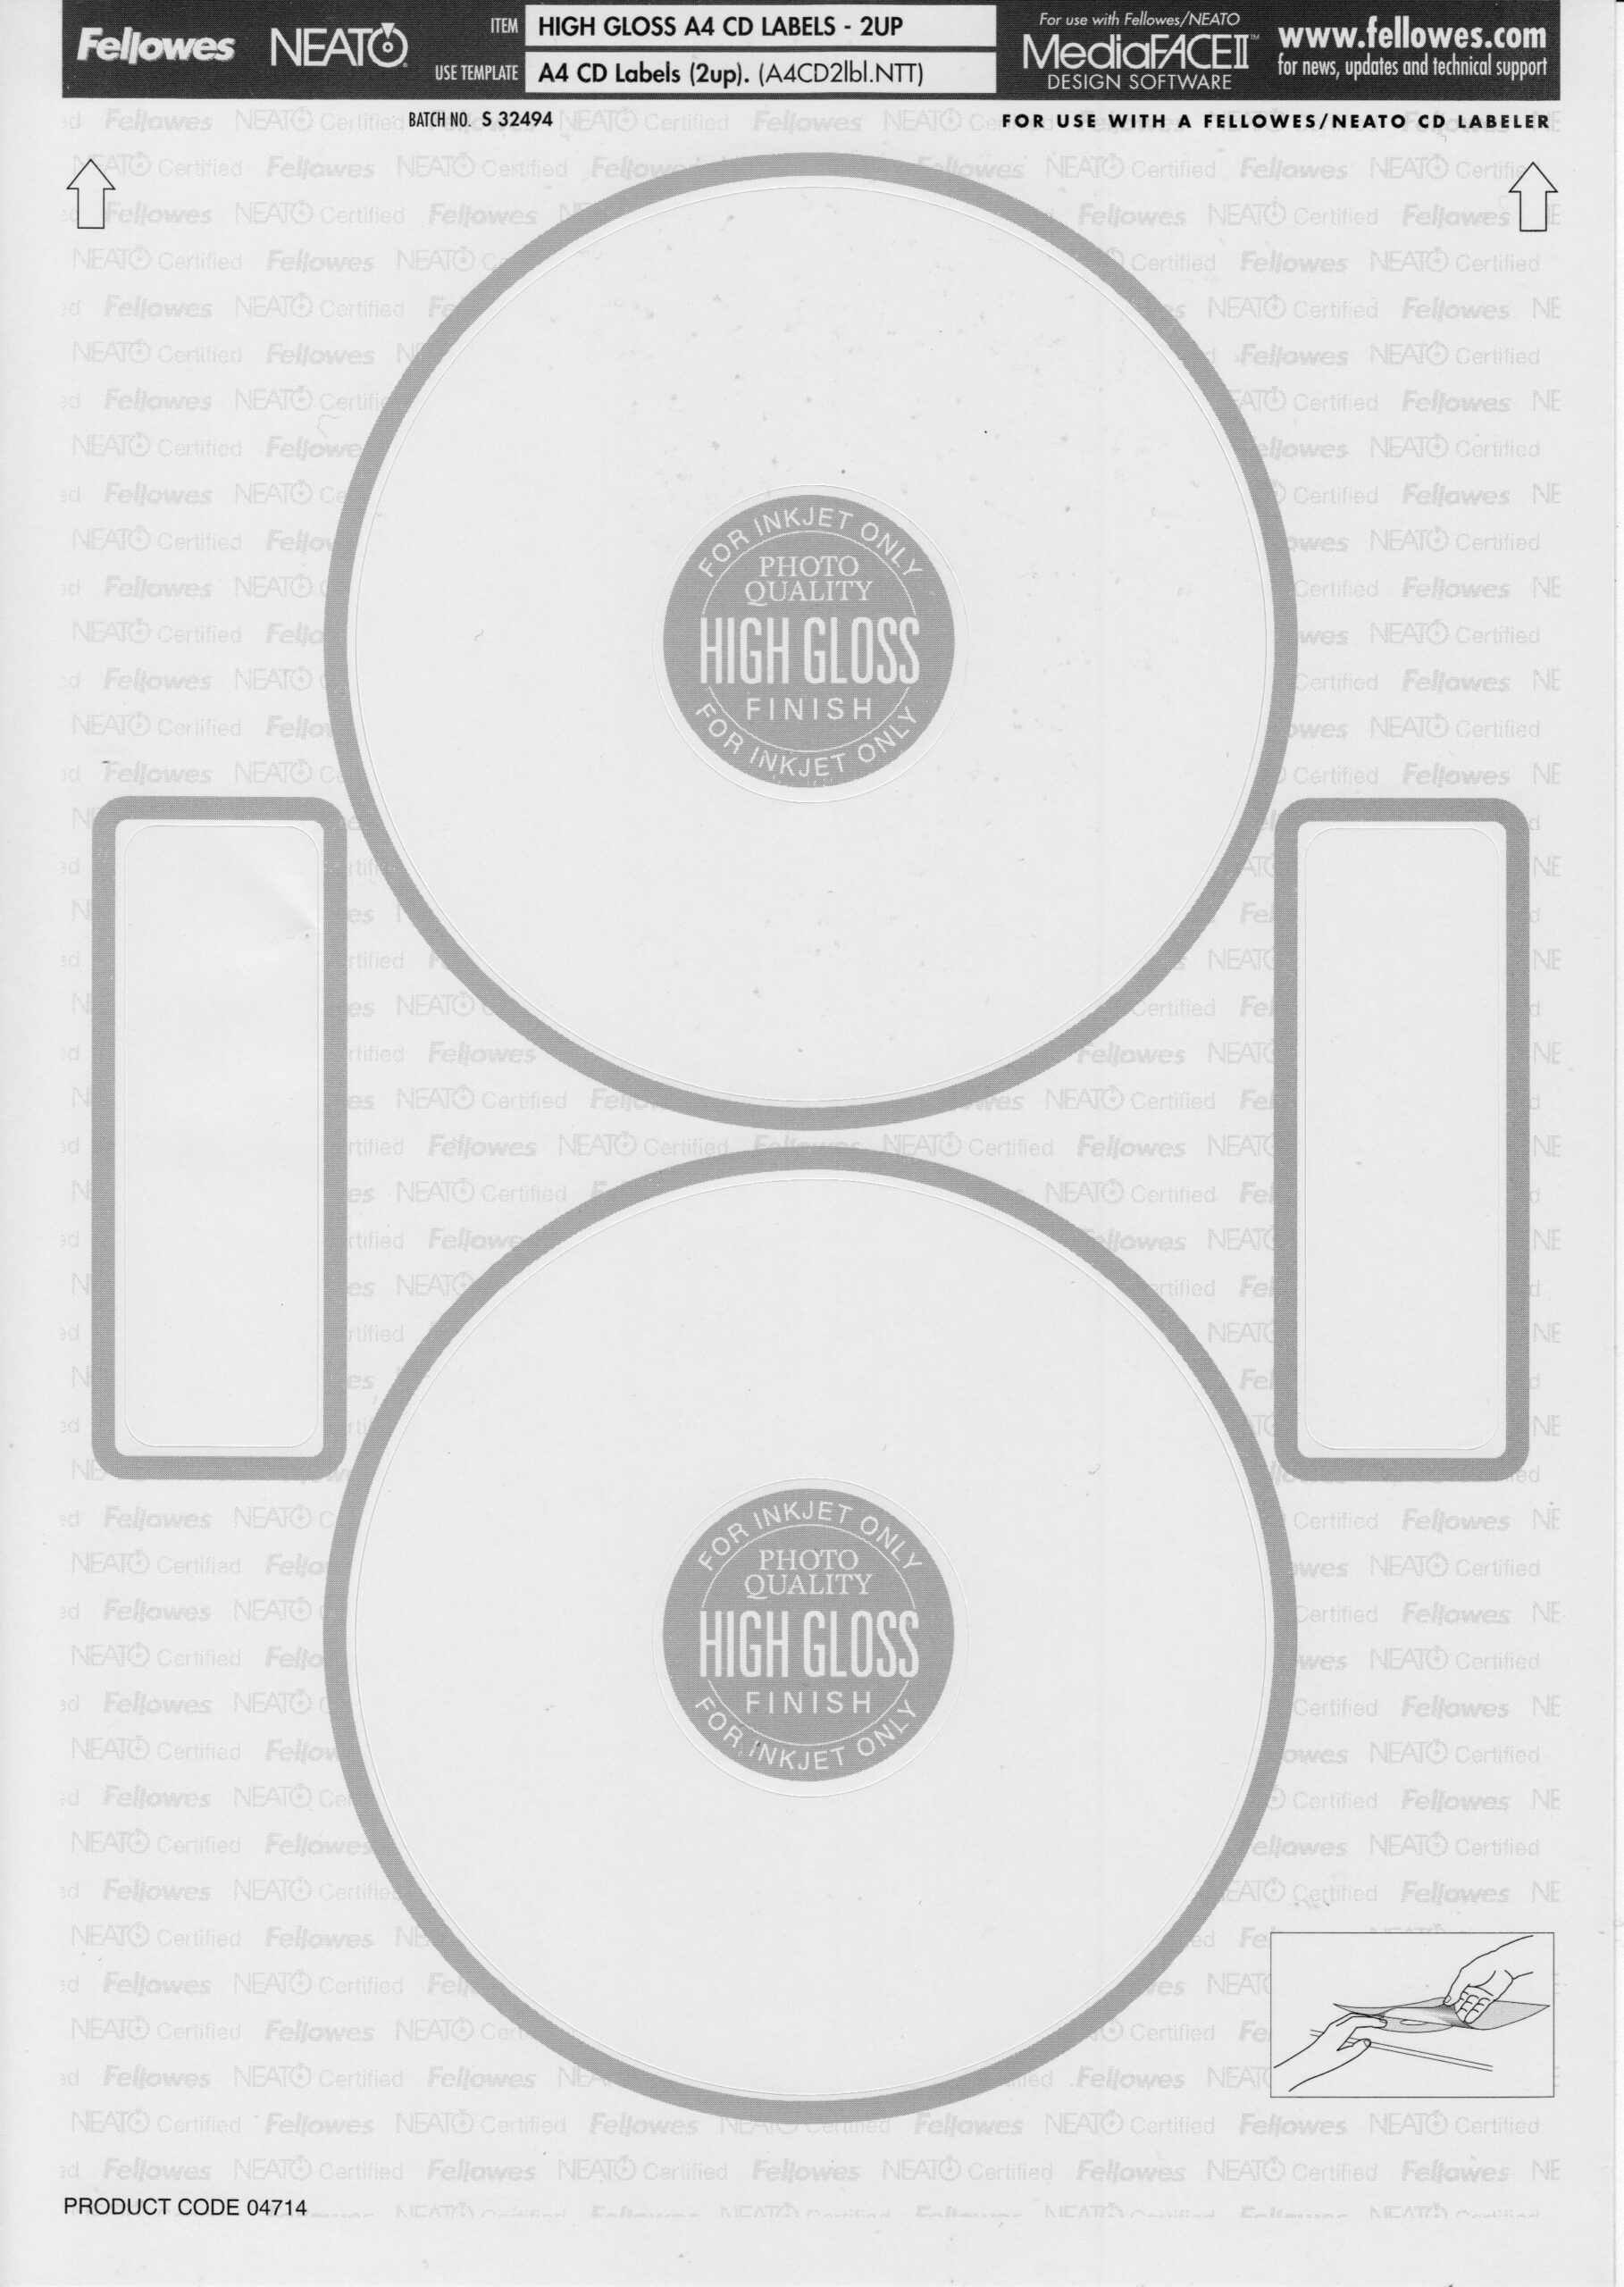 Tech Flashback: Fellowes Neato 2000 Cd Labeler Kit | Gough's Within Neato By Fellowes Cd Label Template